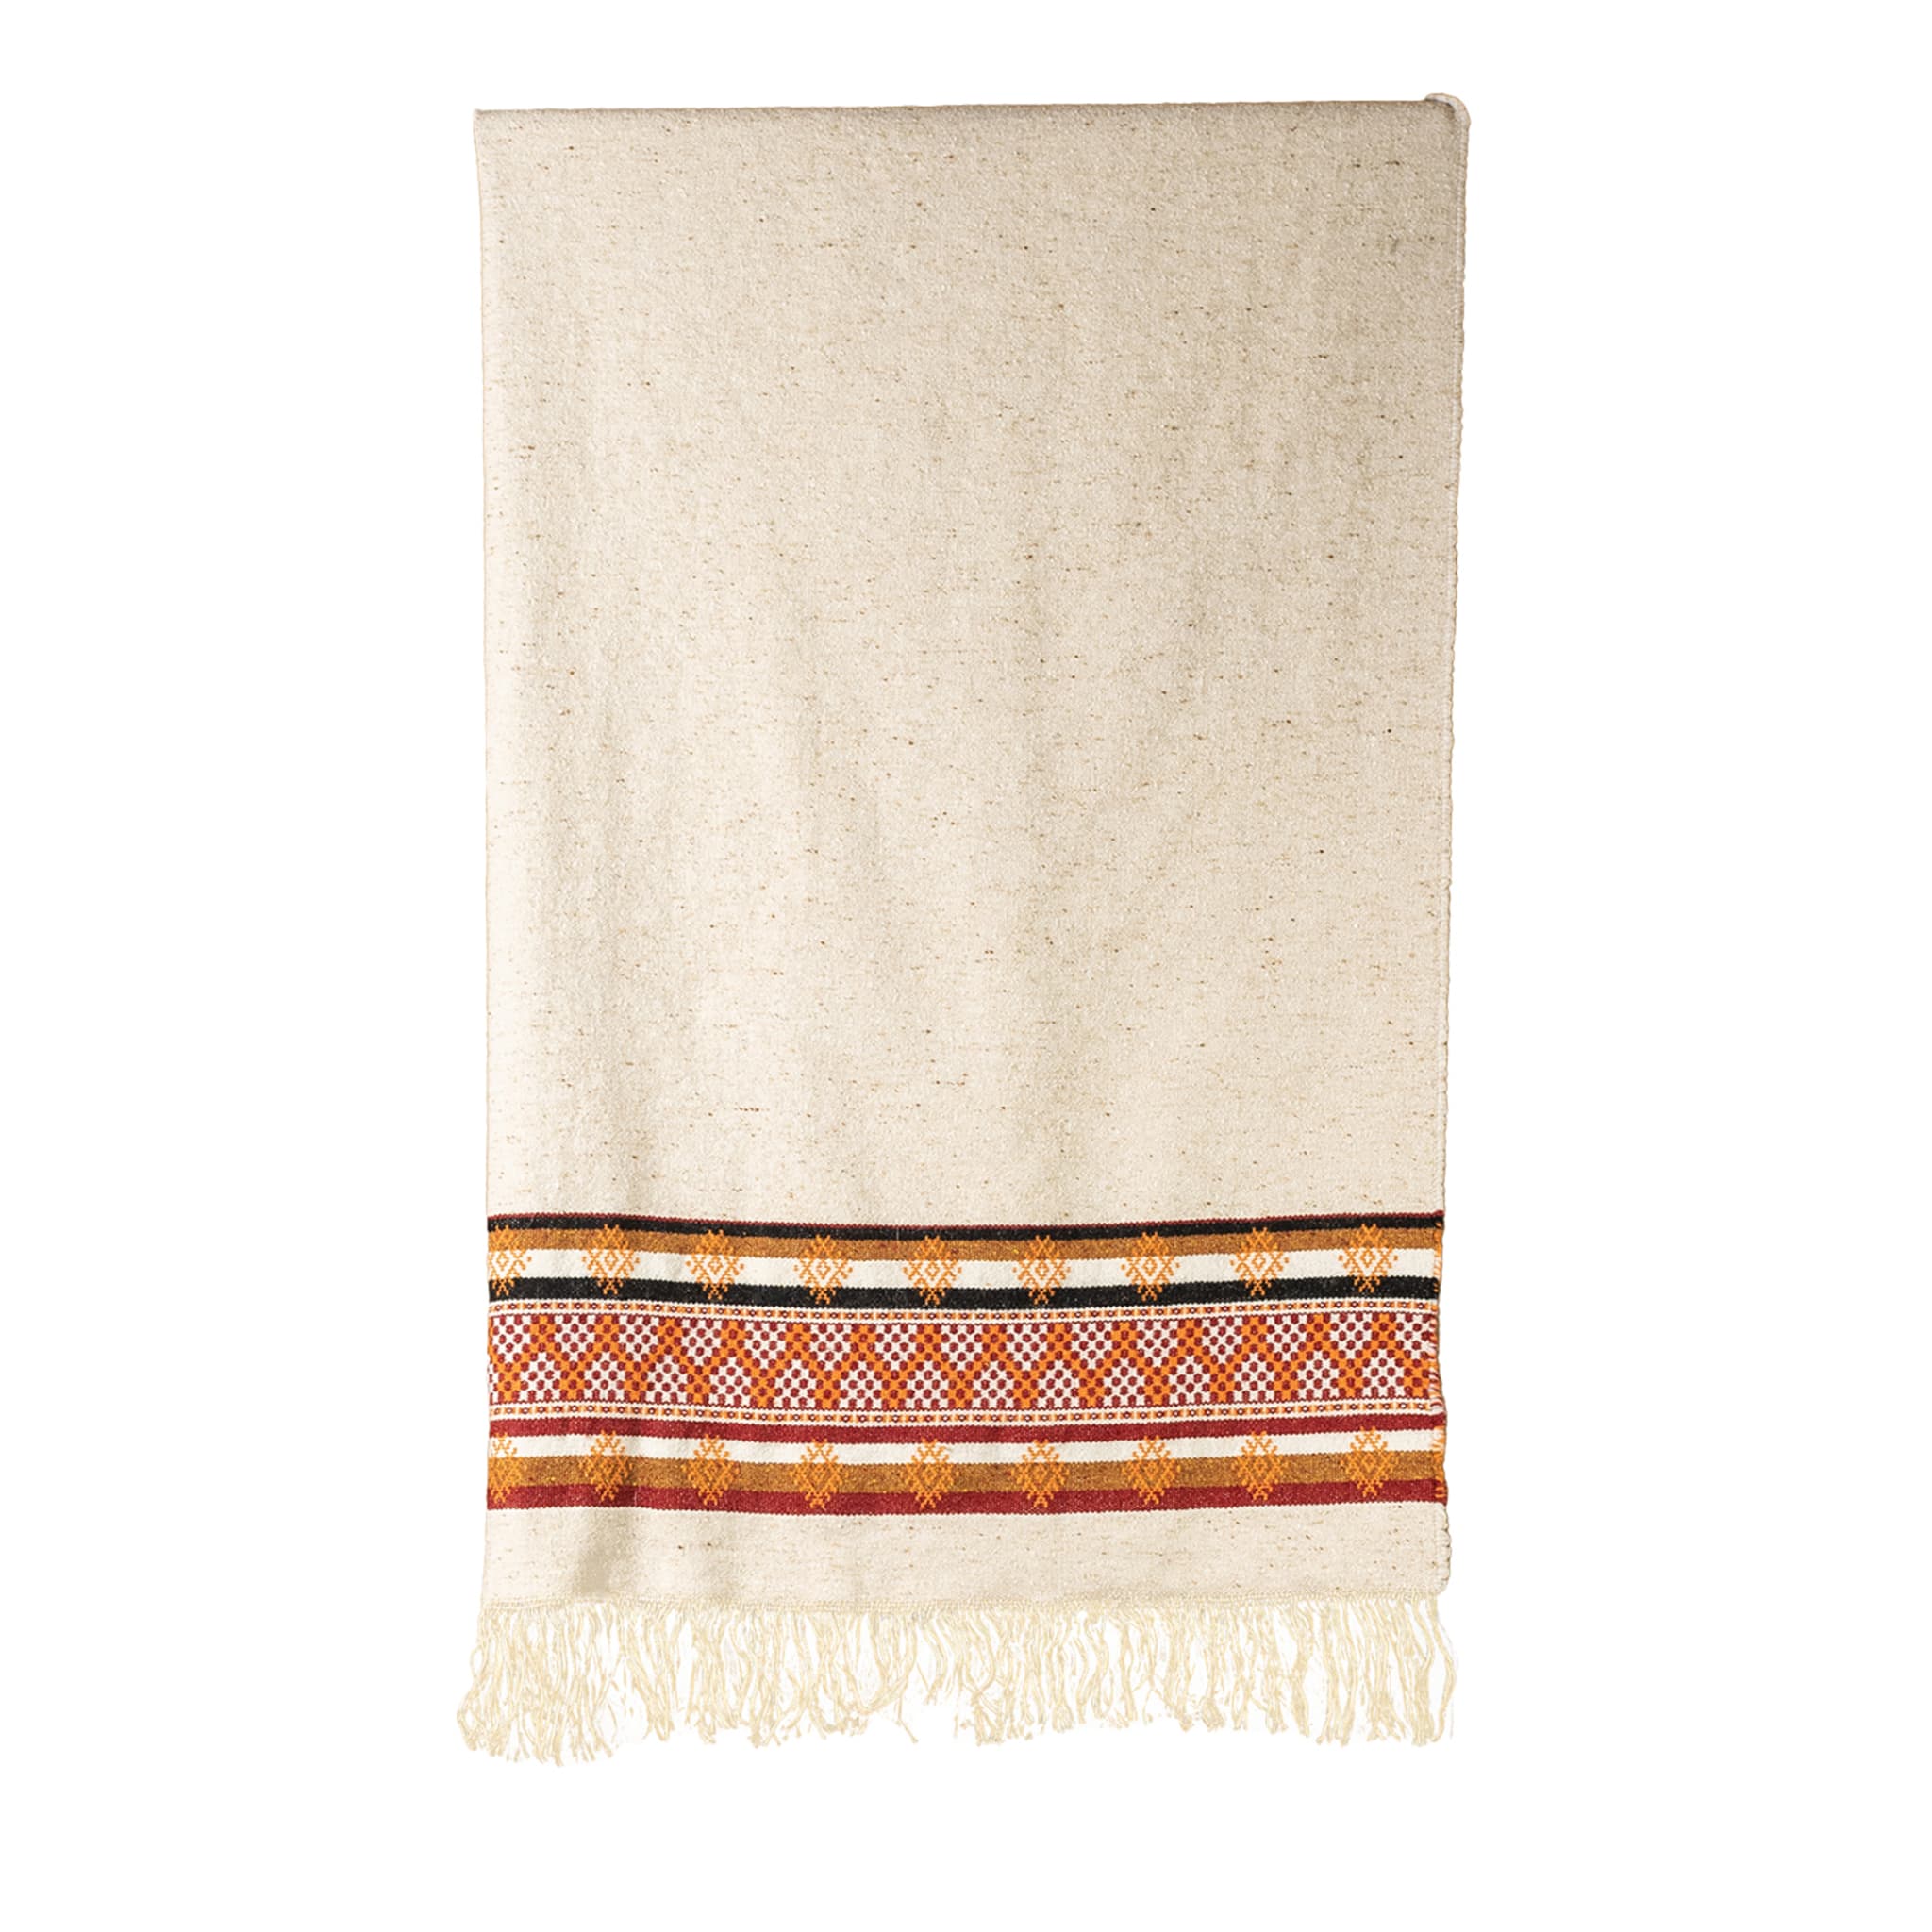 Ruggito Fringed Patterned Polychrome Blanket - Main view